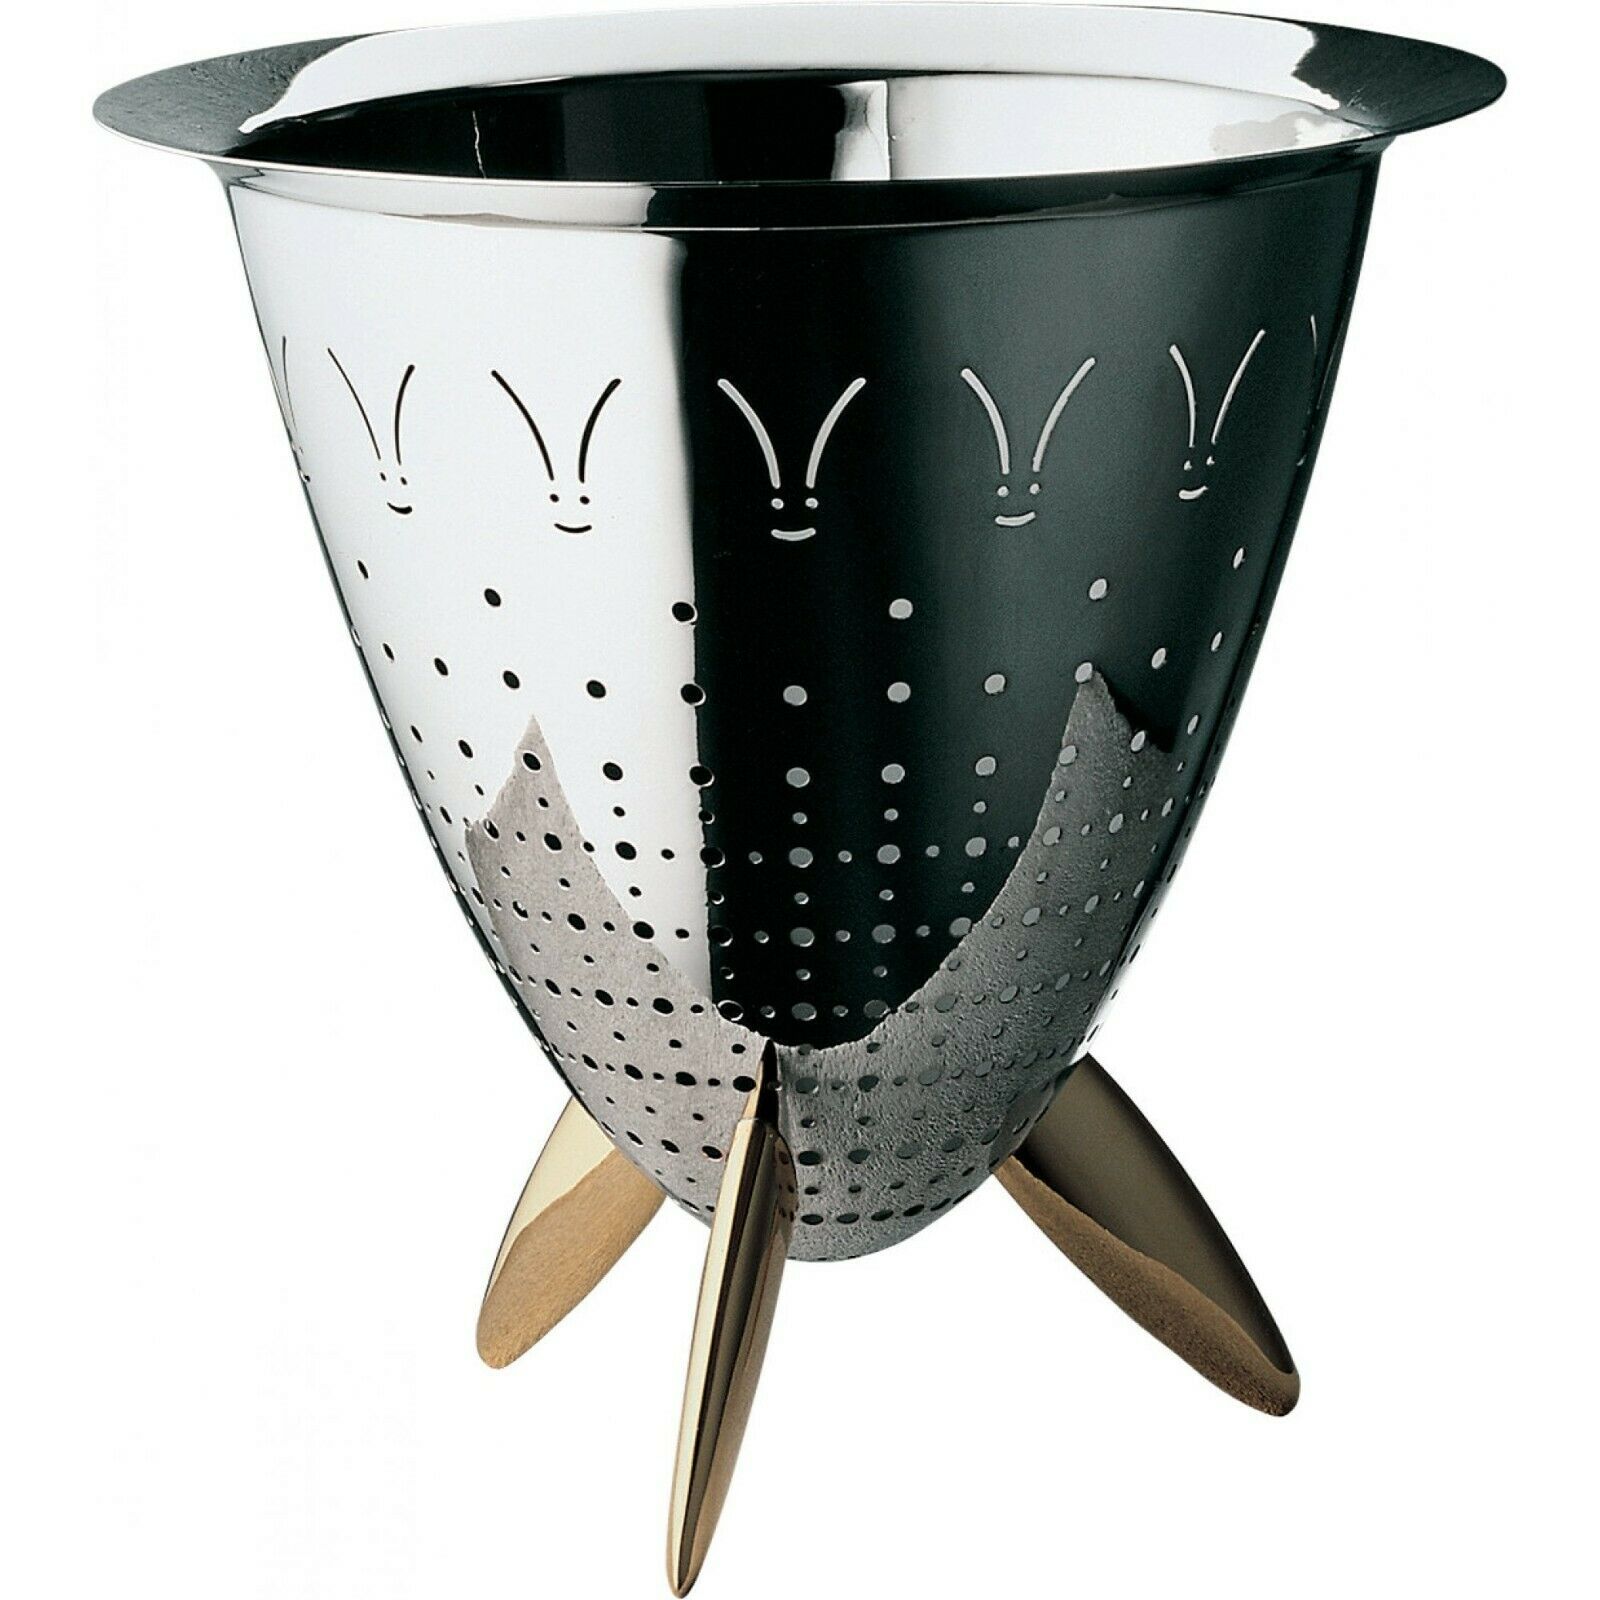 90025 Max le chinois Colander by Philippe Starck